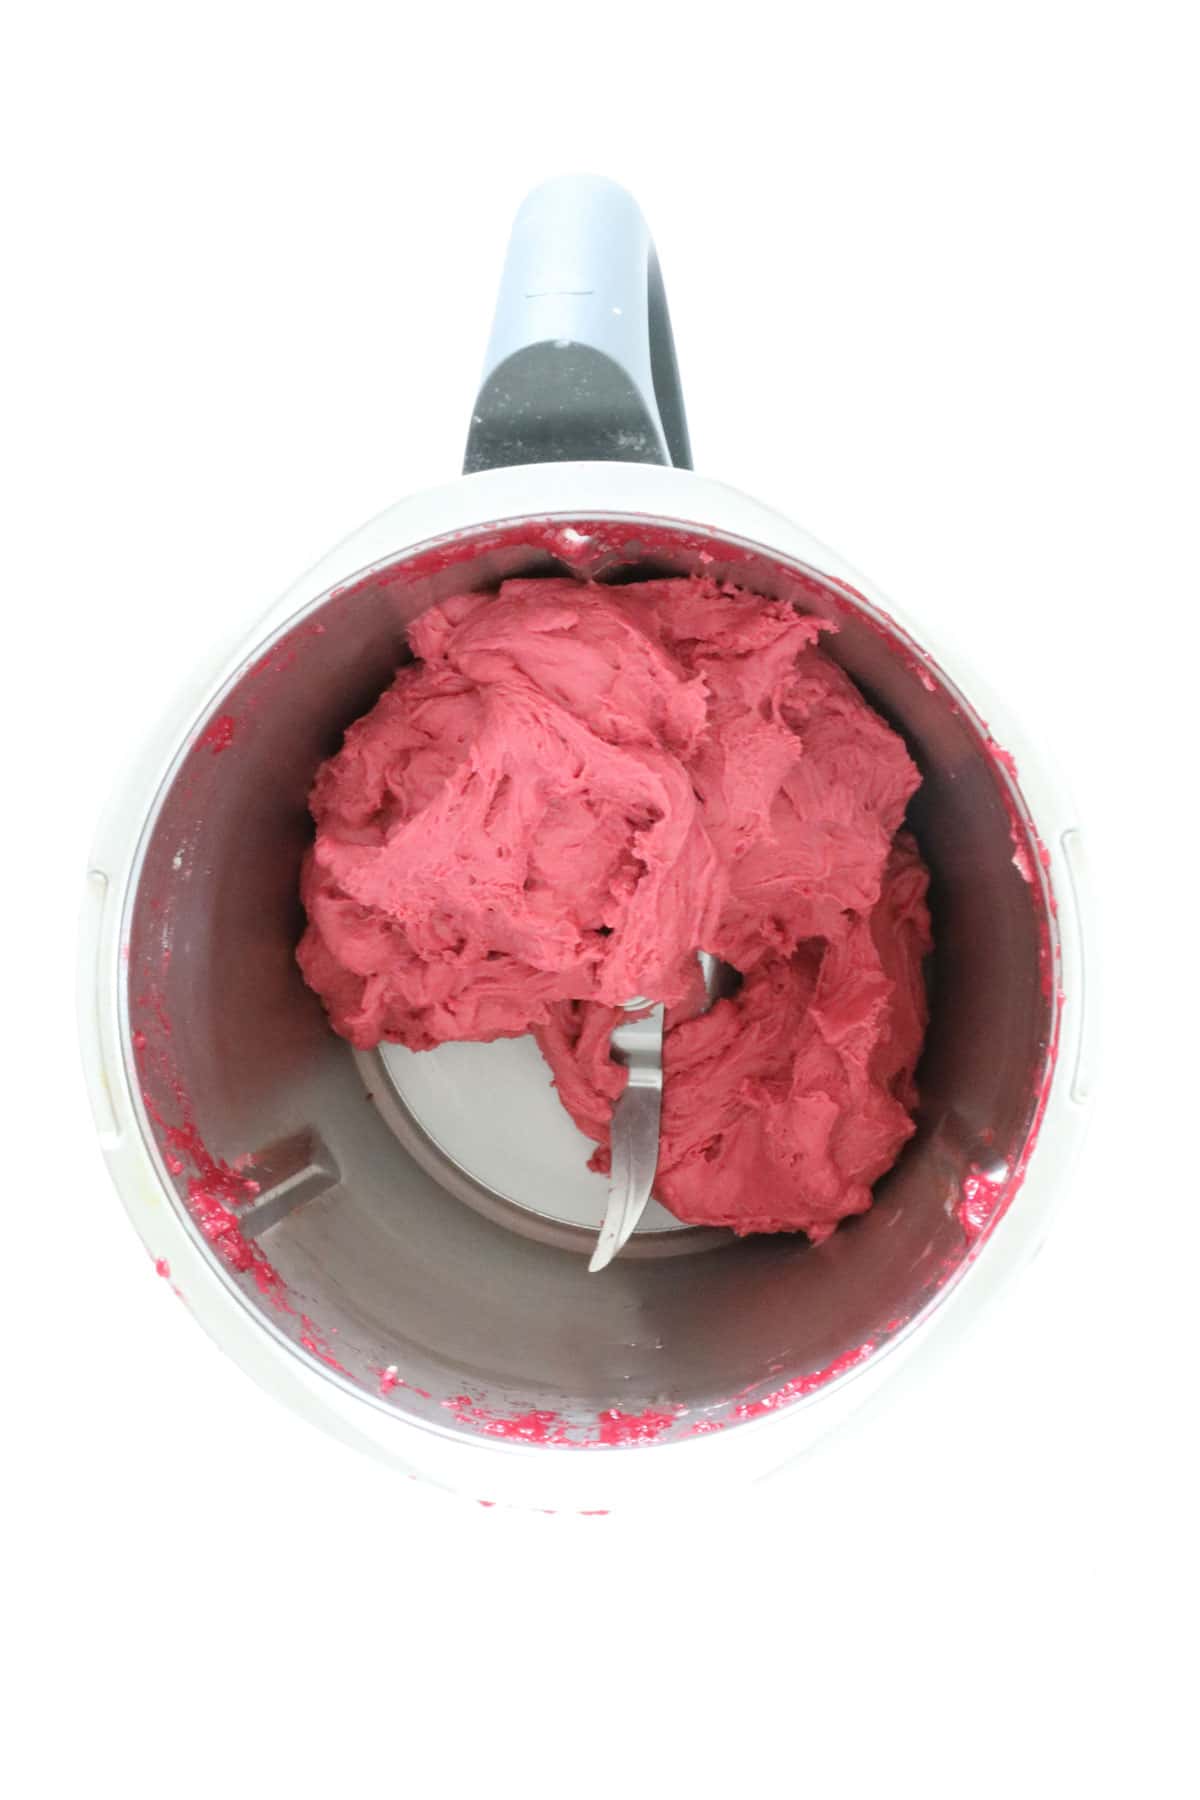 Beetroot dough in a Thermomix.